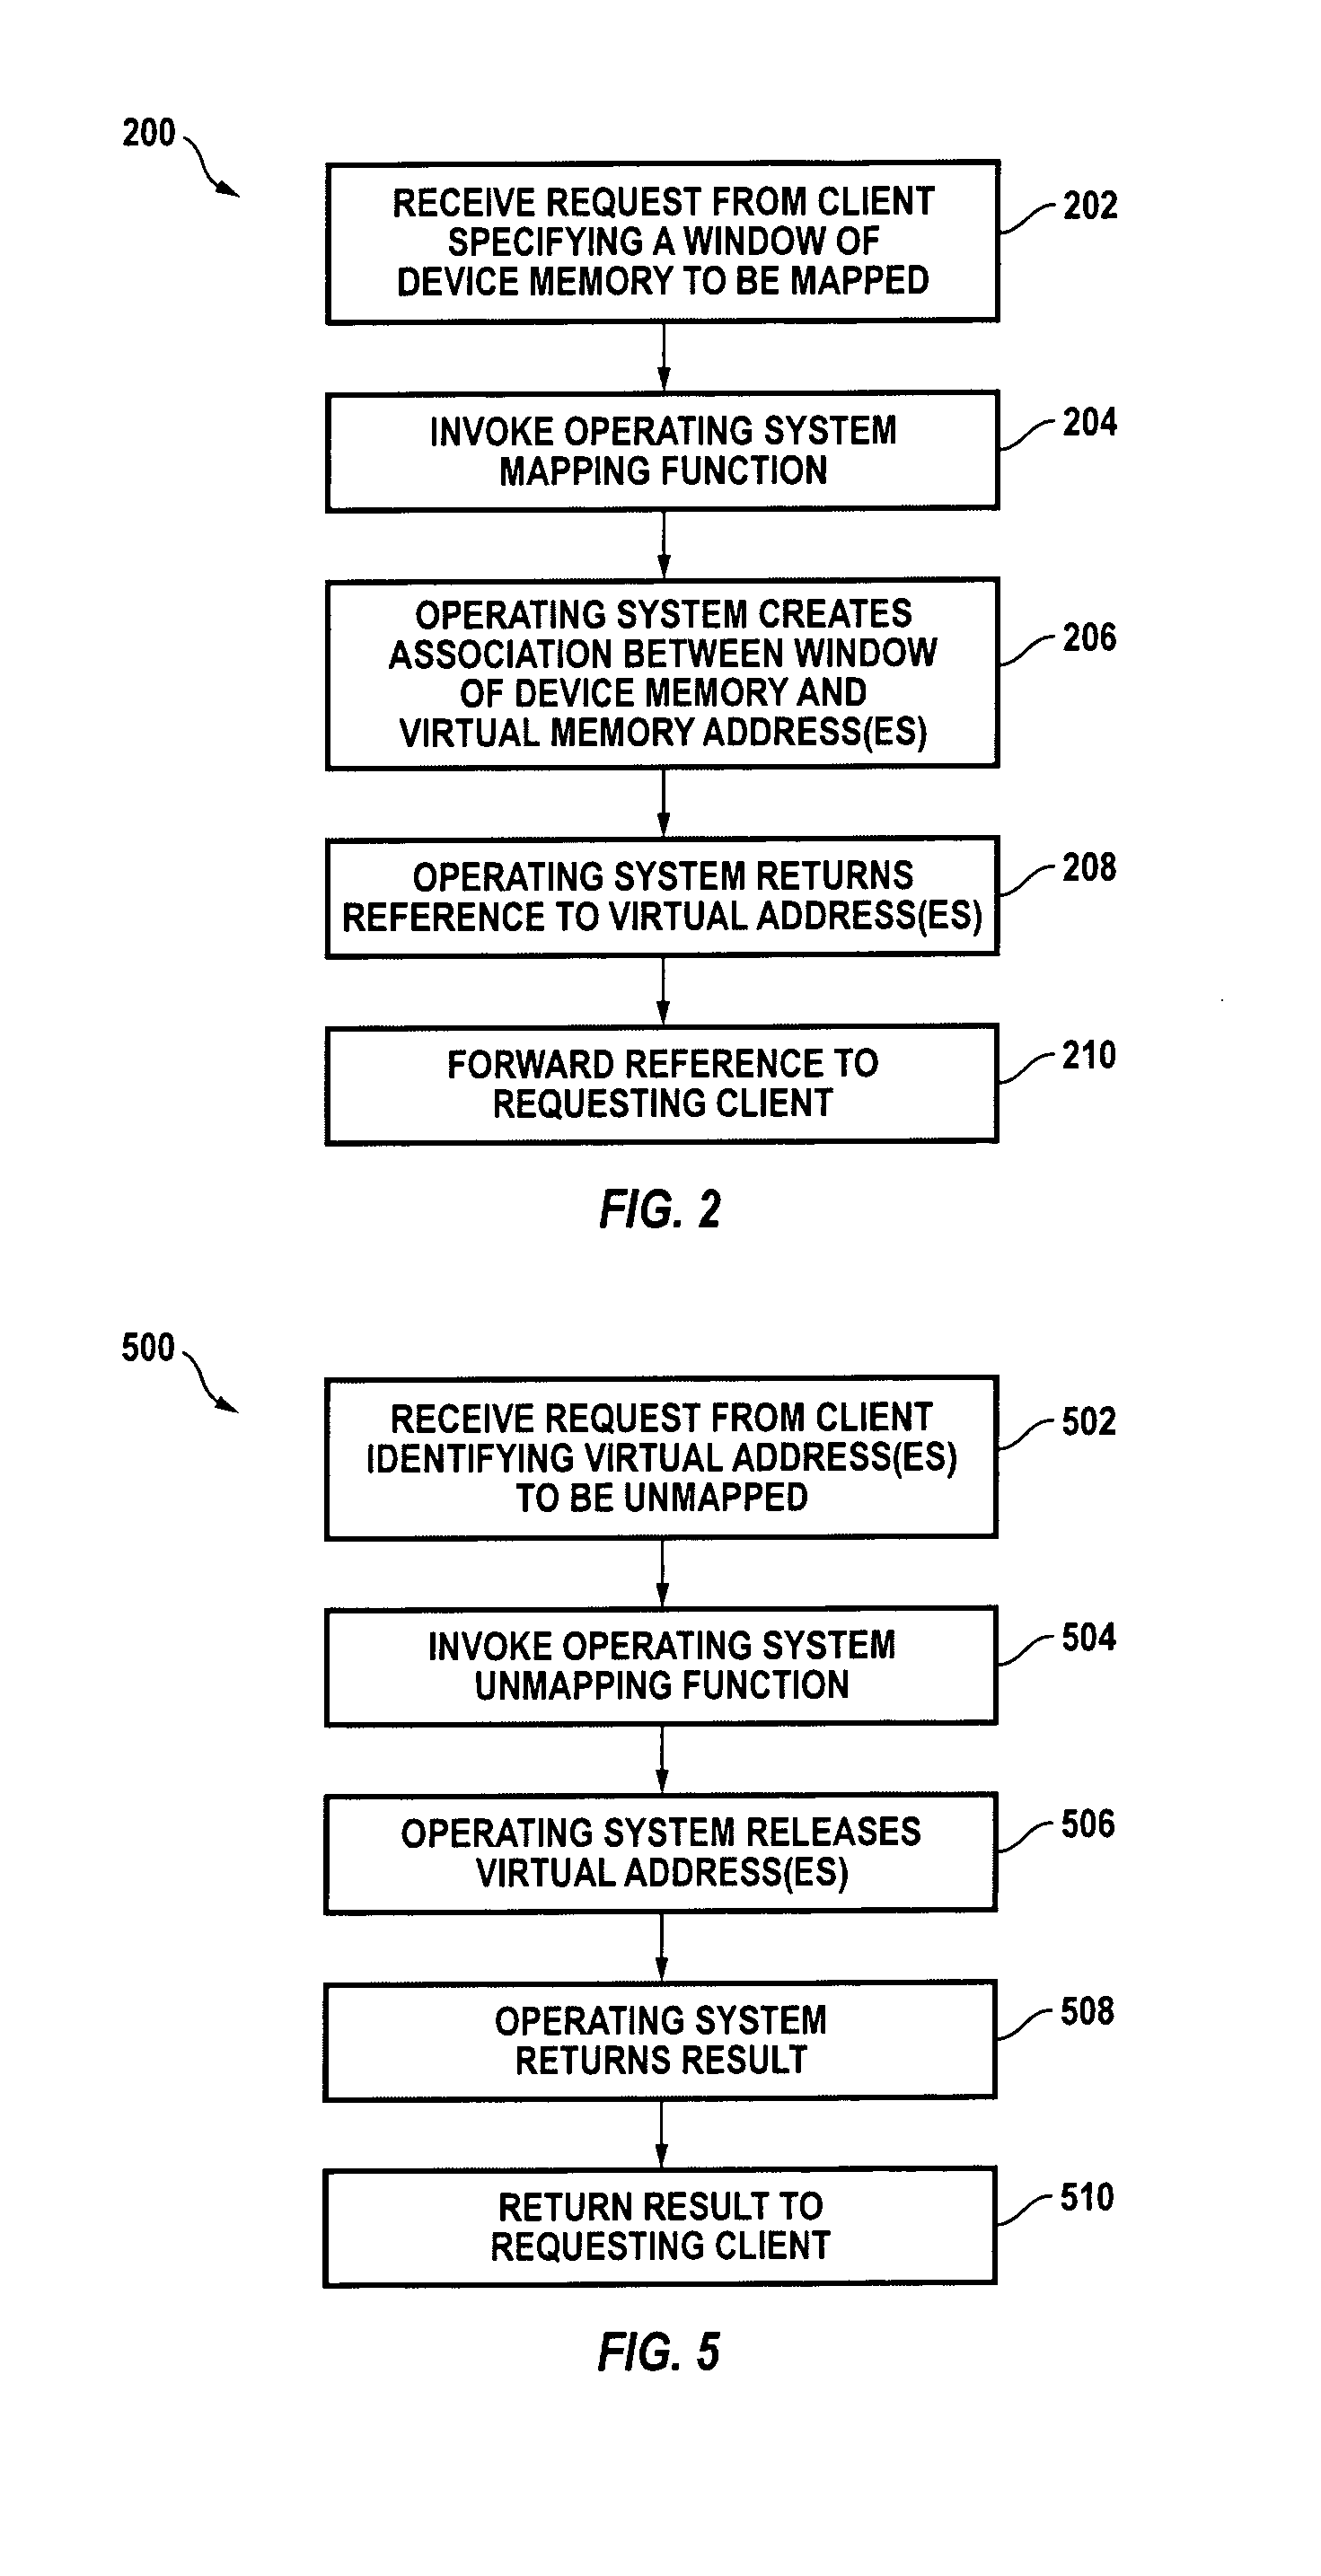 Dynamically creating or removing a physical-to-virtual address mapping in a memory of a peripheral device